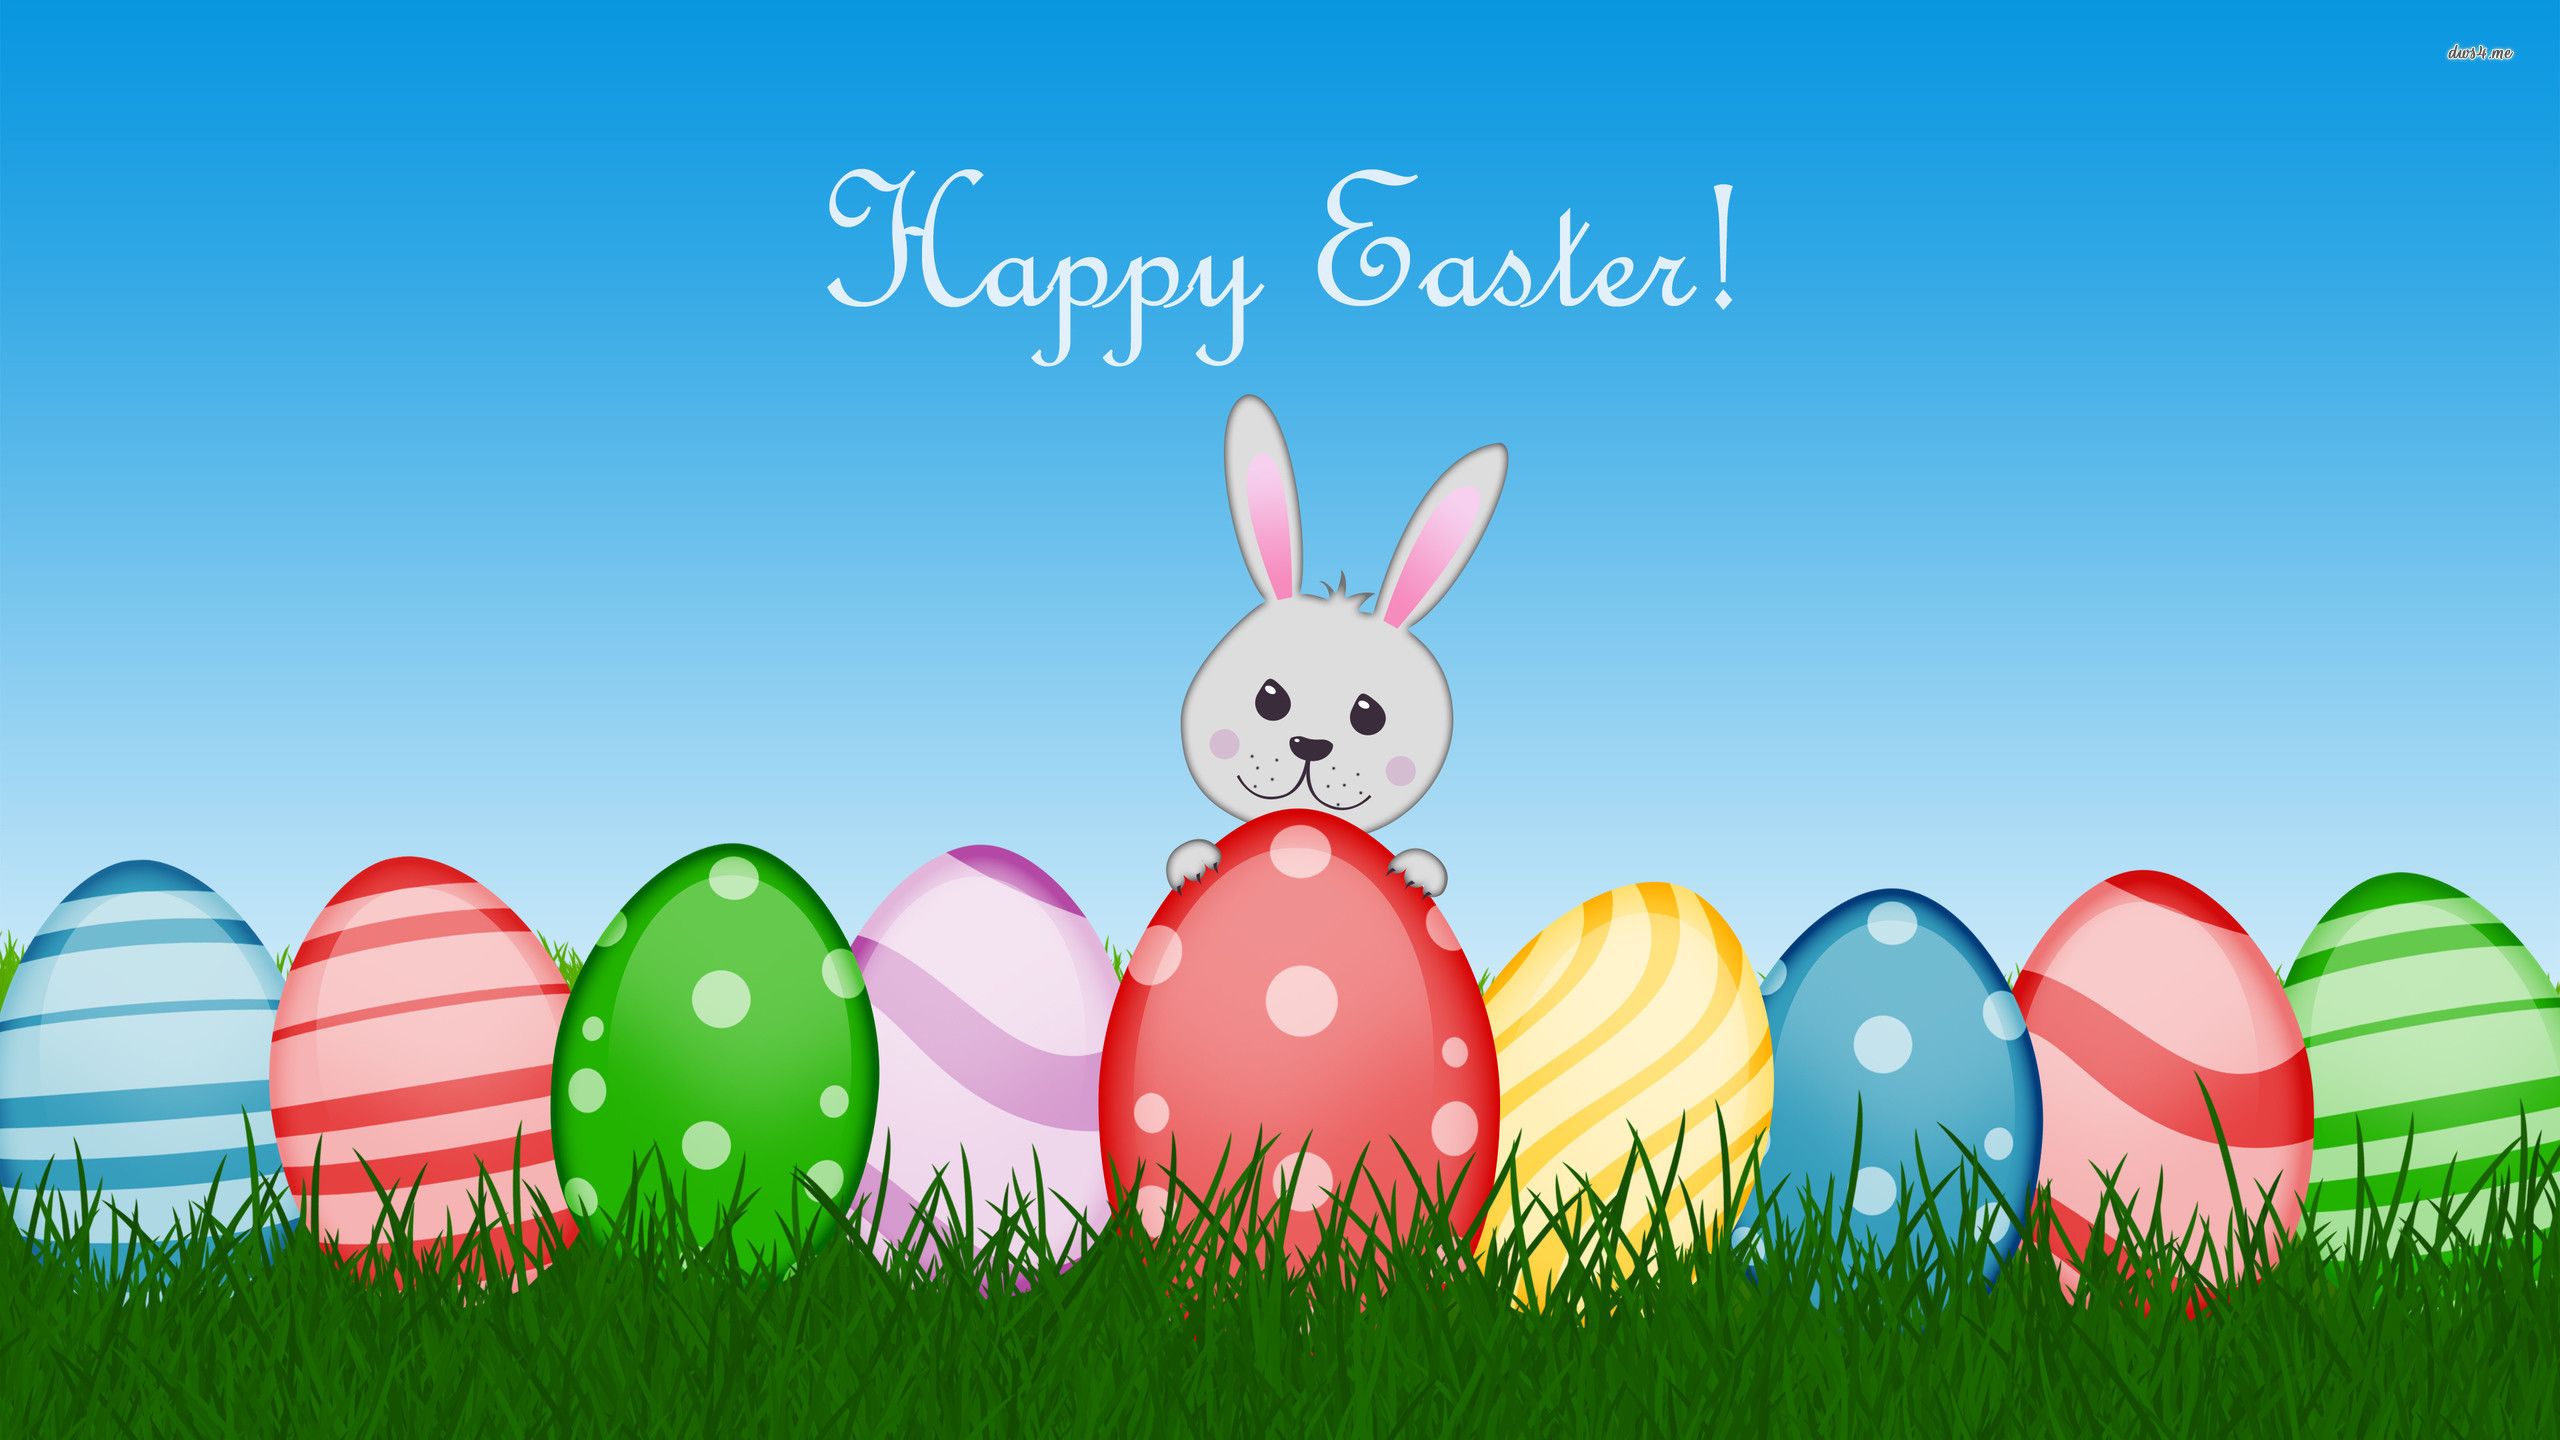 Free download 64 Cute Easter Wallpaper [2560x1440] for your Desktop, Mobile & Tablet. Explore Free Wallpaper Background for Easter. Happy Easter Wallpaper, Free Easter Wallpaper, Easter Bunny Wallpaper